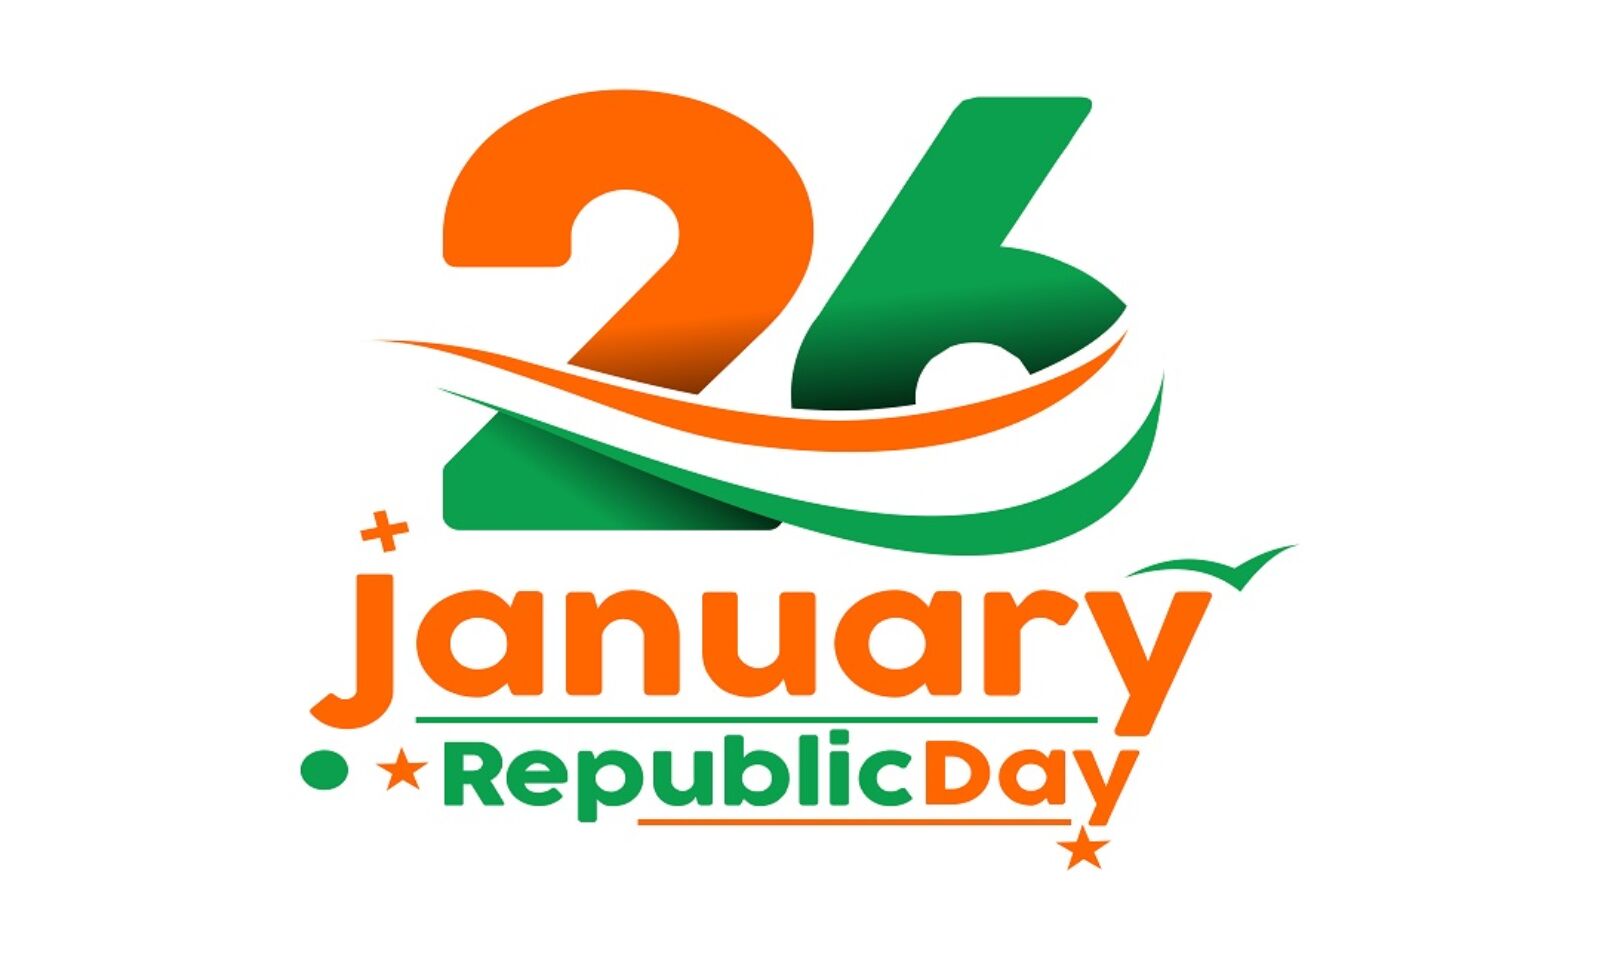 FREE Happy Republic Day Templates & Examples - Edit Online & Download